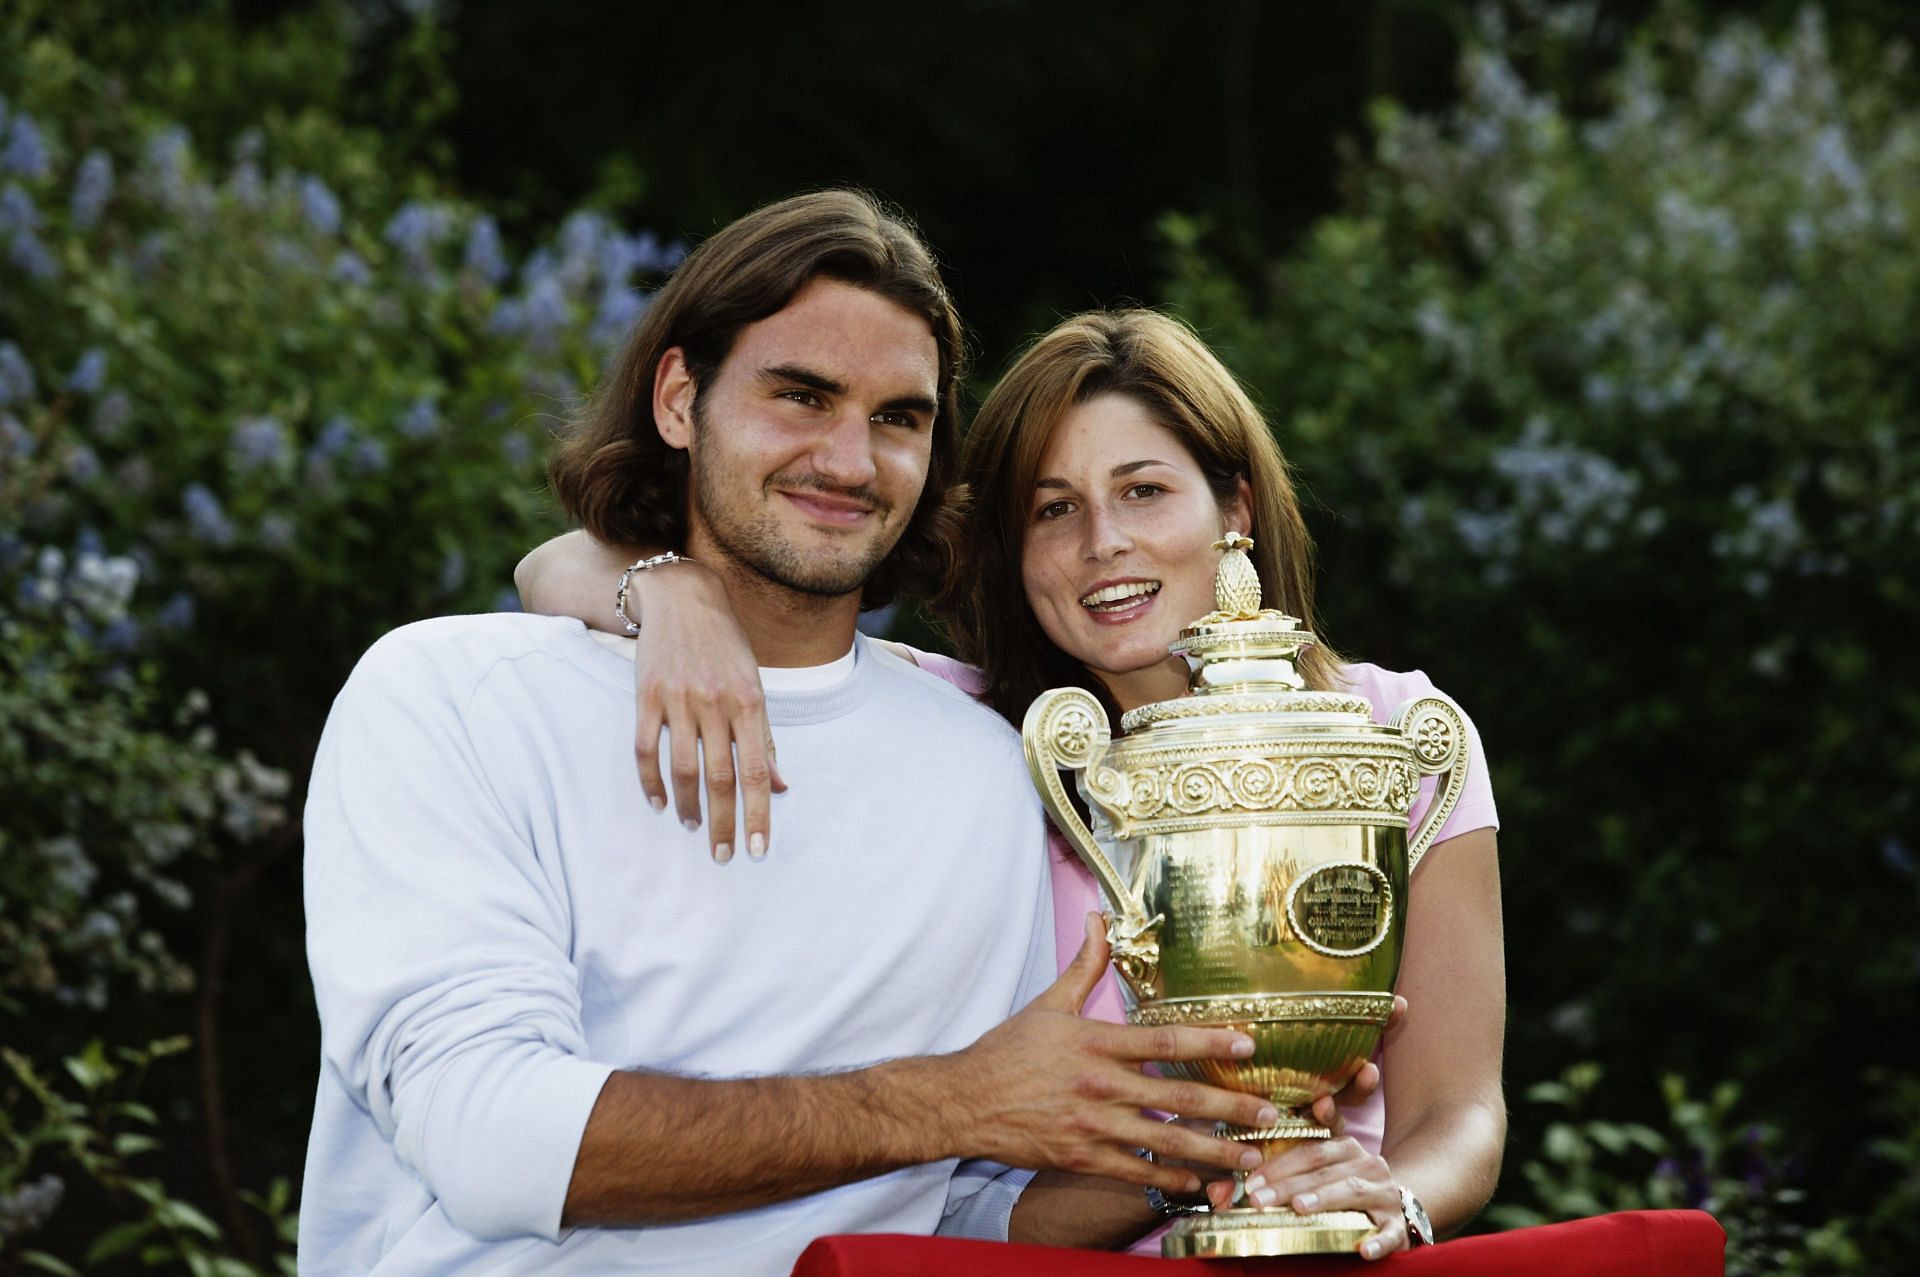 Roger Federer with his wife (then girlfriend) Mirka after winning the Wimbledon in 2003